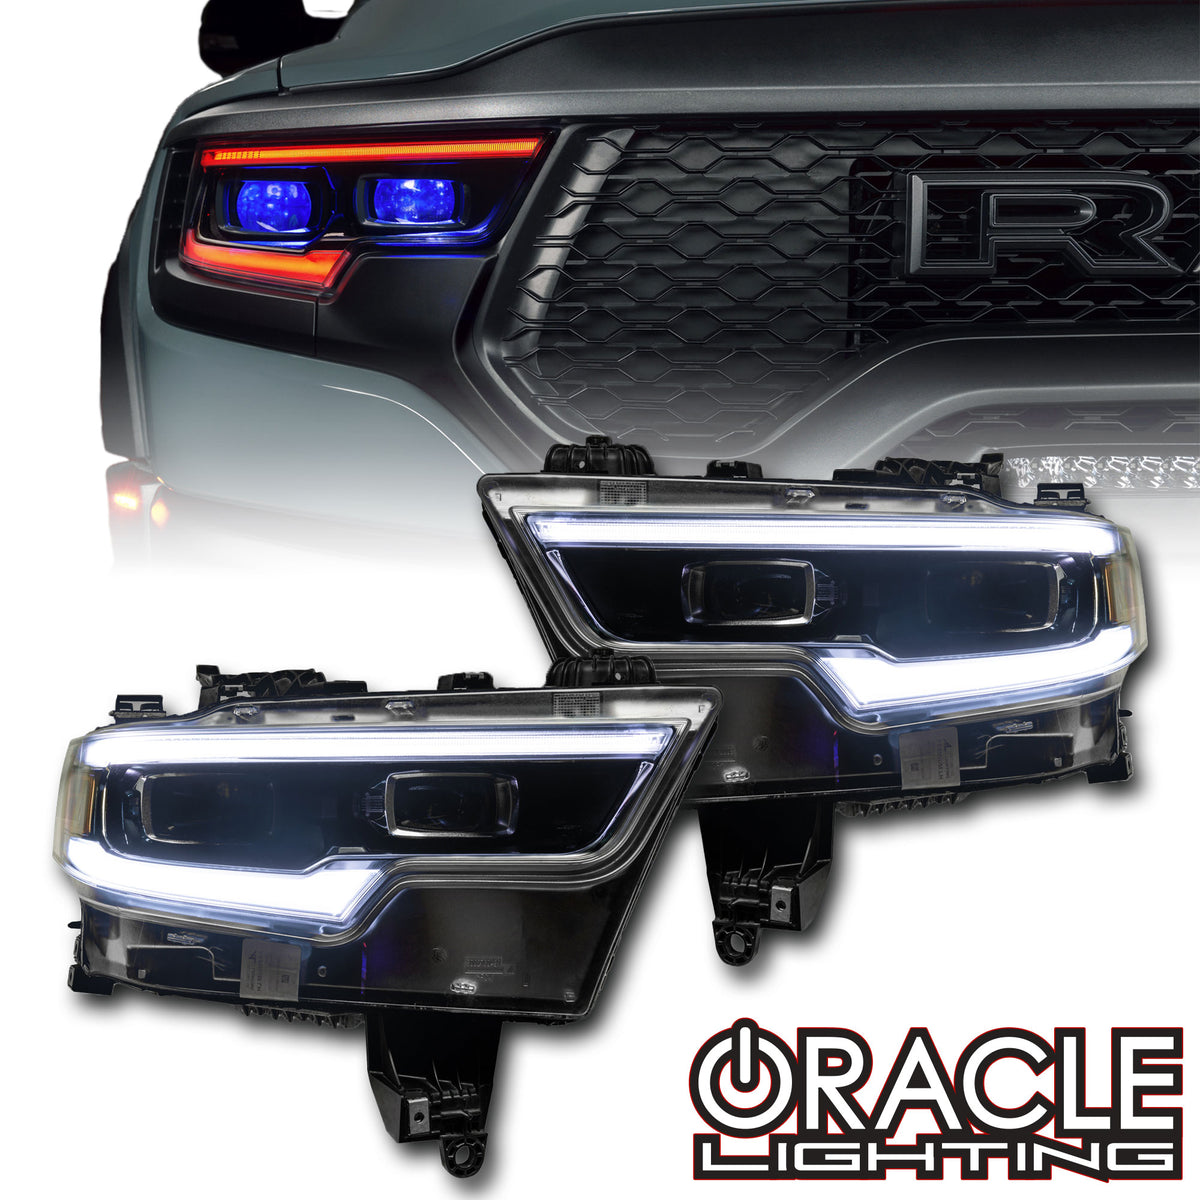 www.oraclelights.com